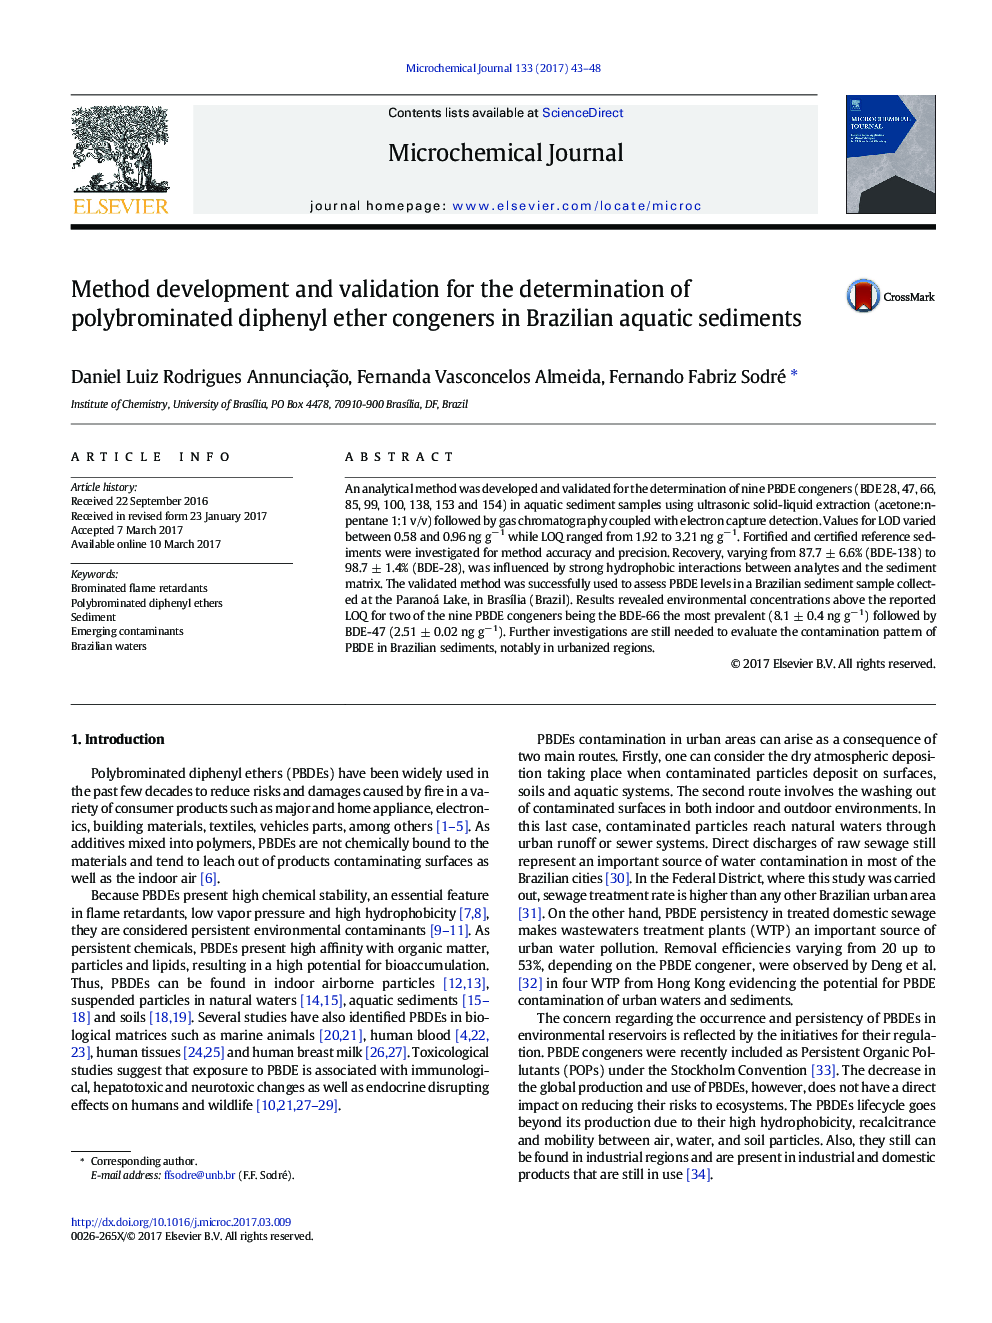 Method development and validation for the determination of polybrominated diphenyl ether congeners in Brazilian aquatic sediments